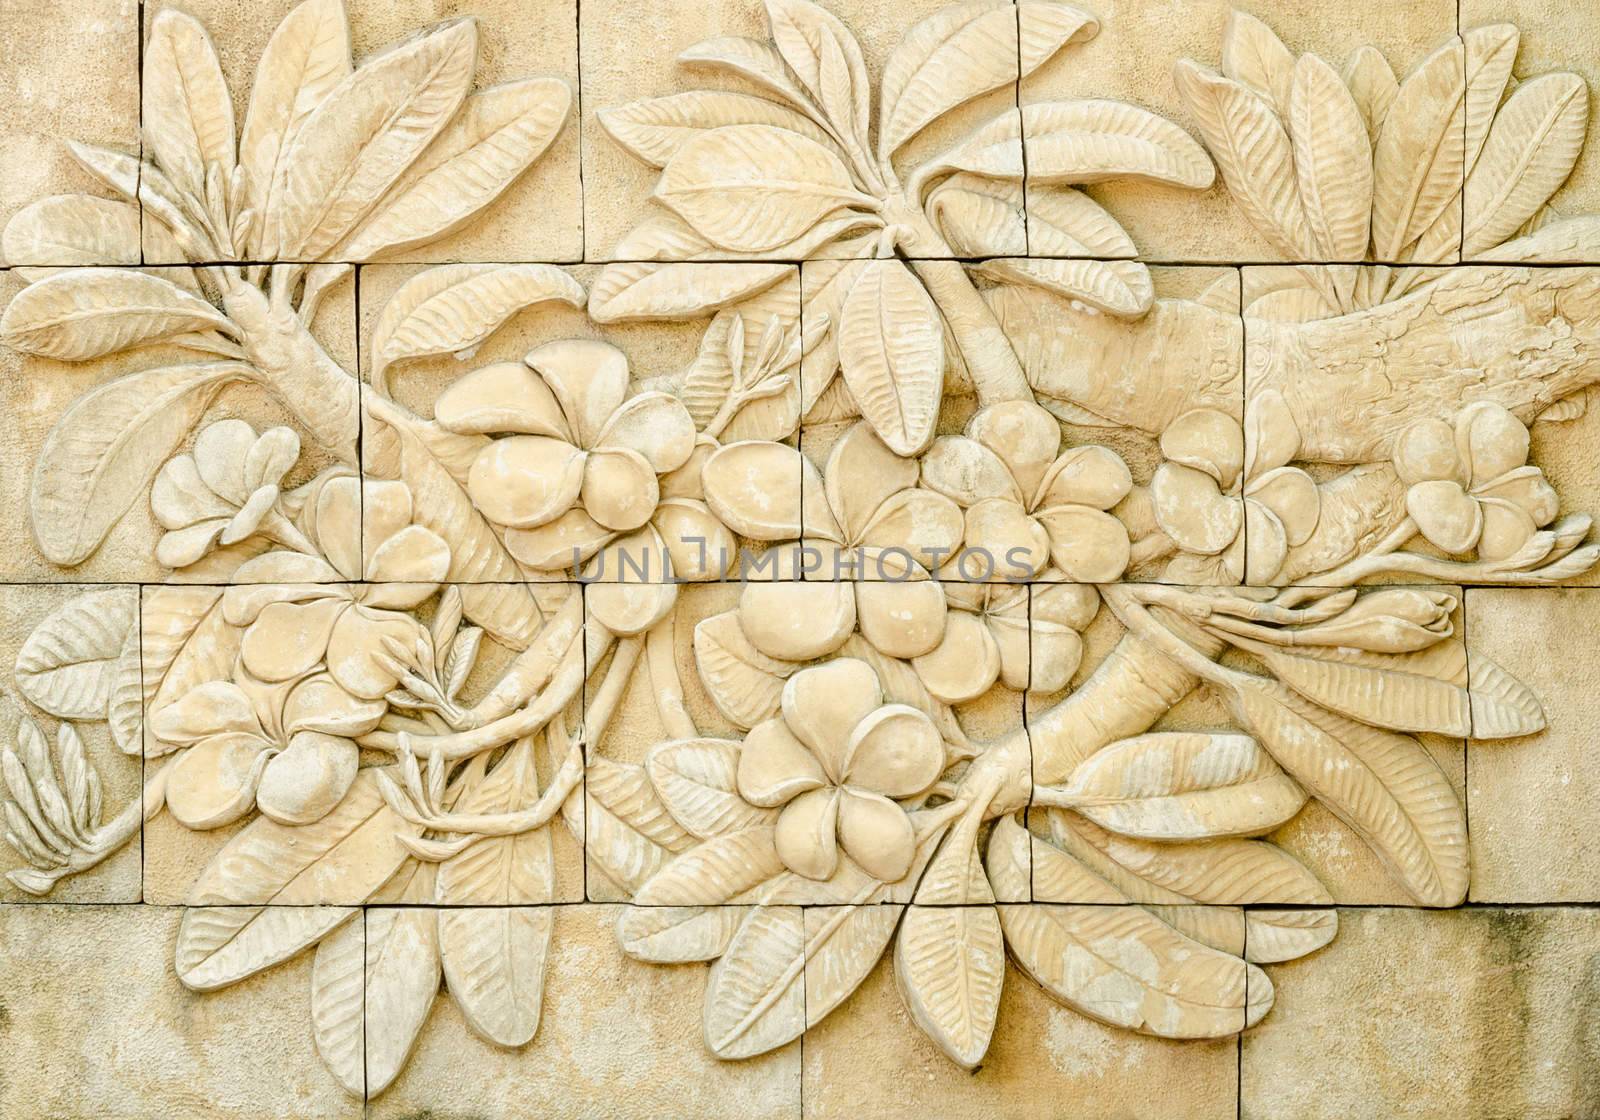 Low relief cement Thai style handcraft of plumeria or frangipani flowers